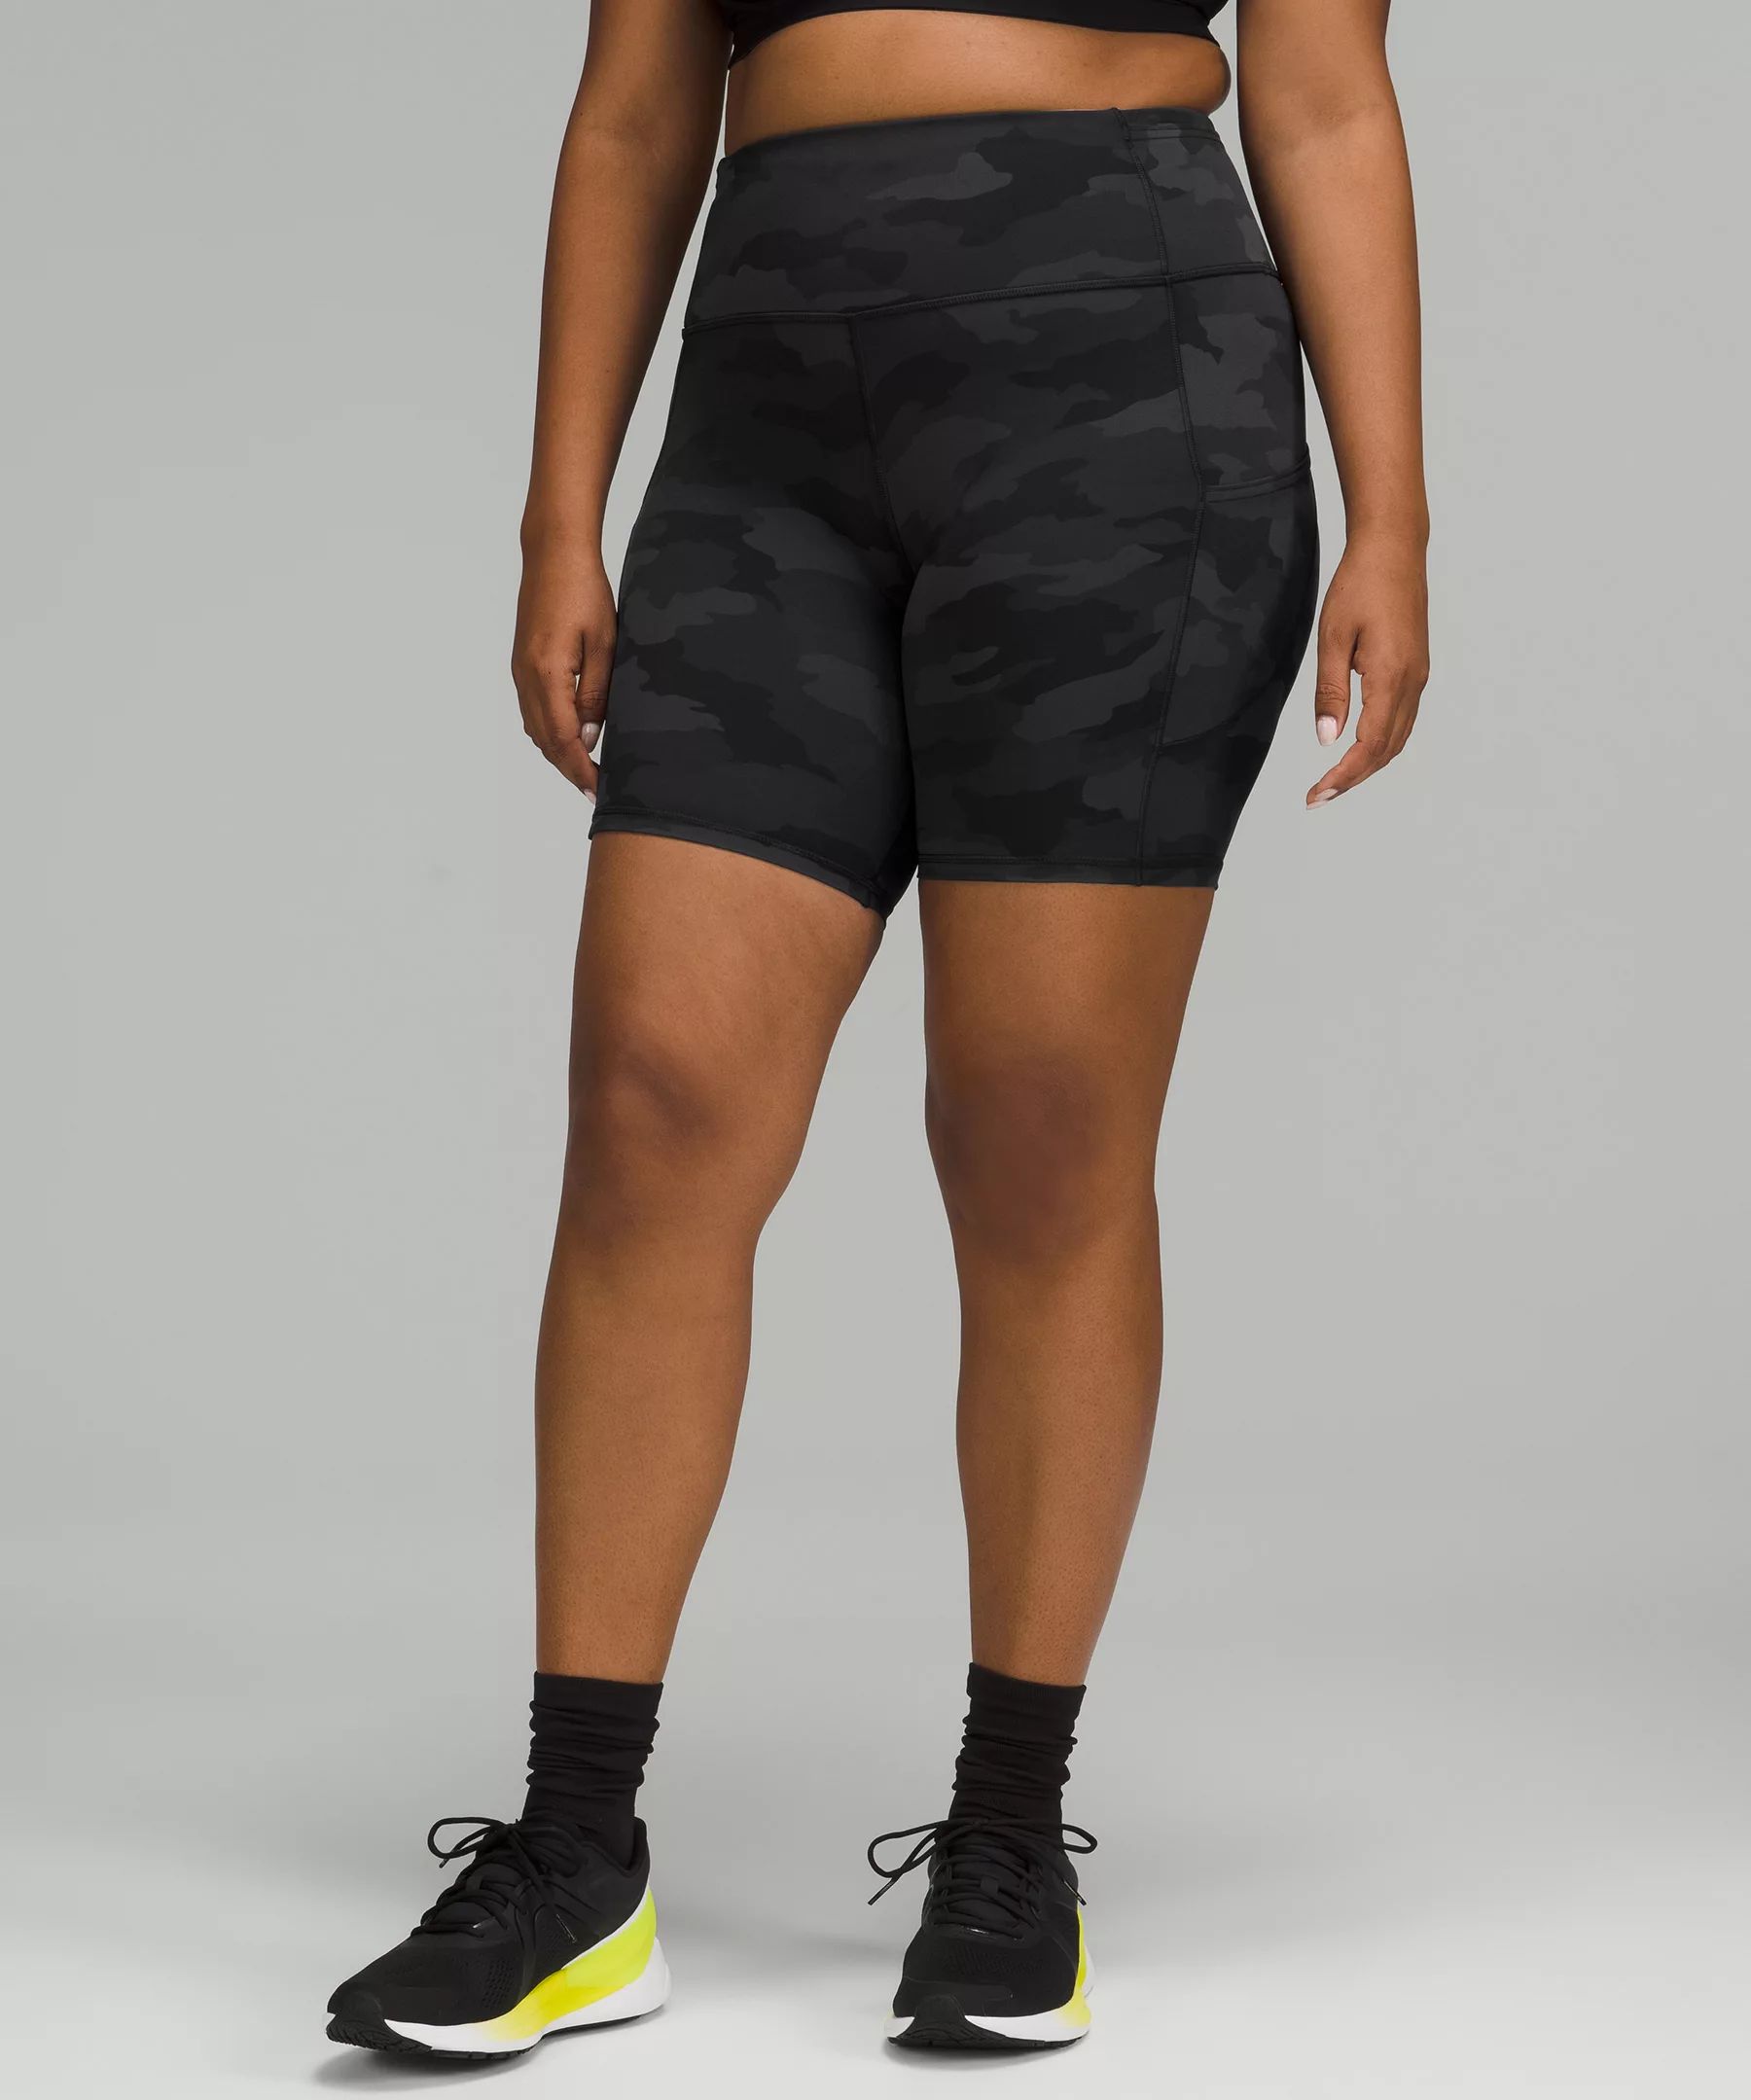 Fast And Free Short 8" Non-Reflective Online Only | Lululemon (US)